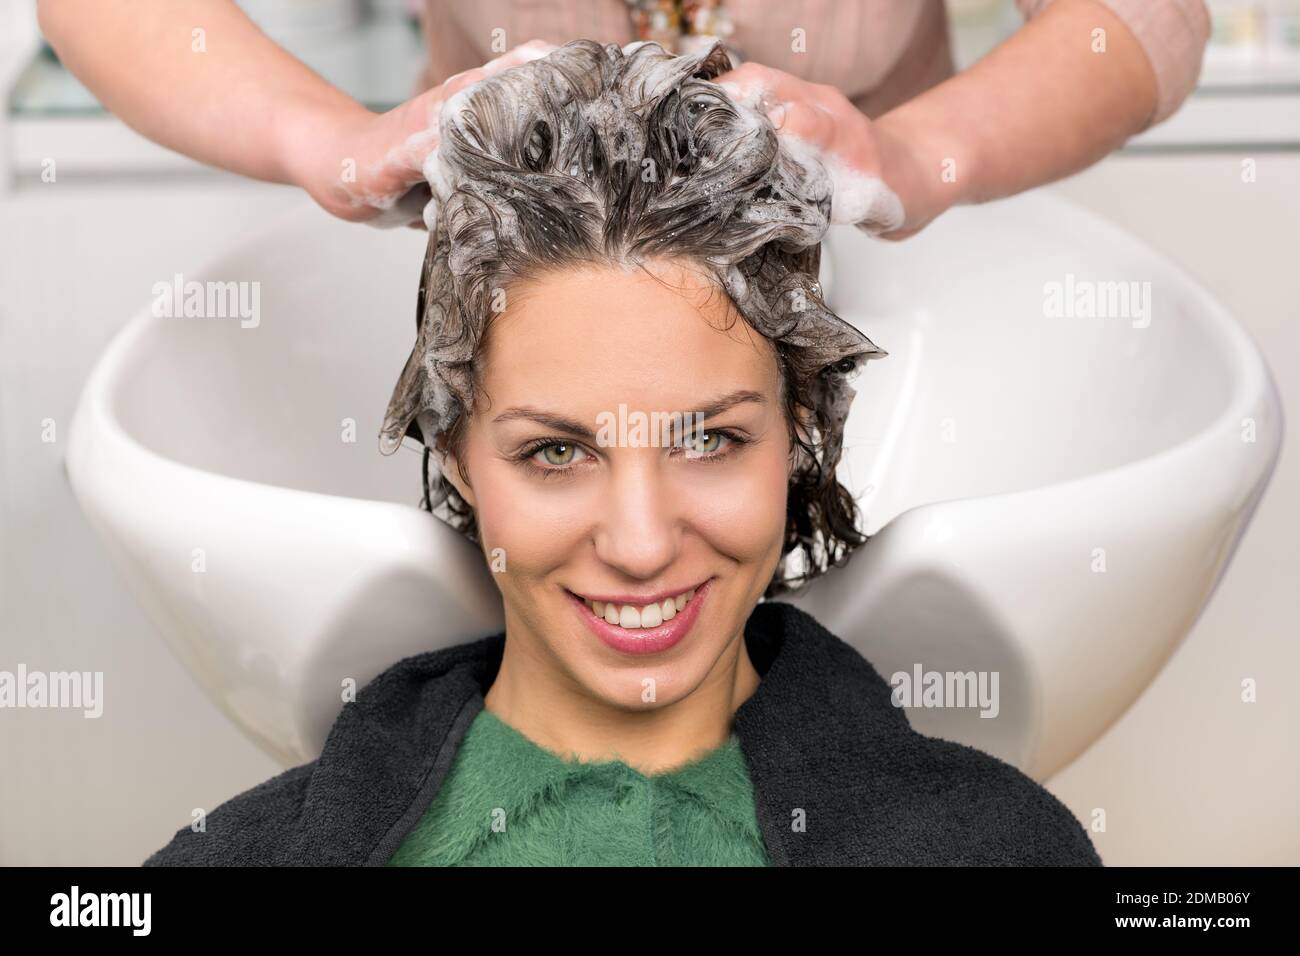 Cute young girl having her hair washed with shampoo by the hands of  professional hairdresser at